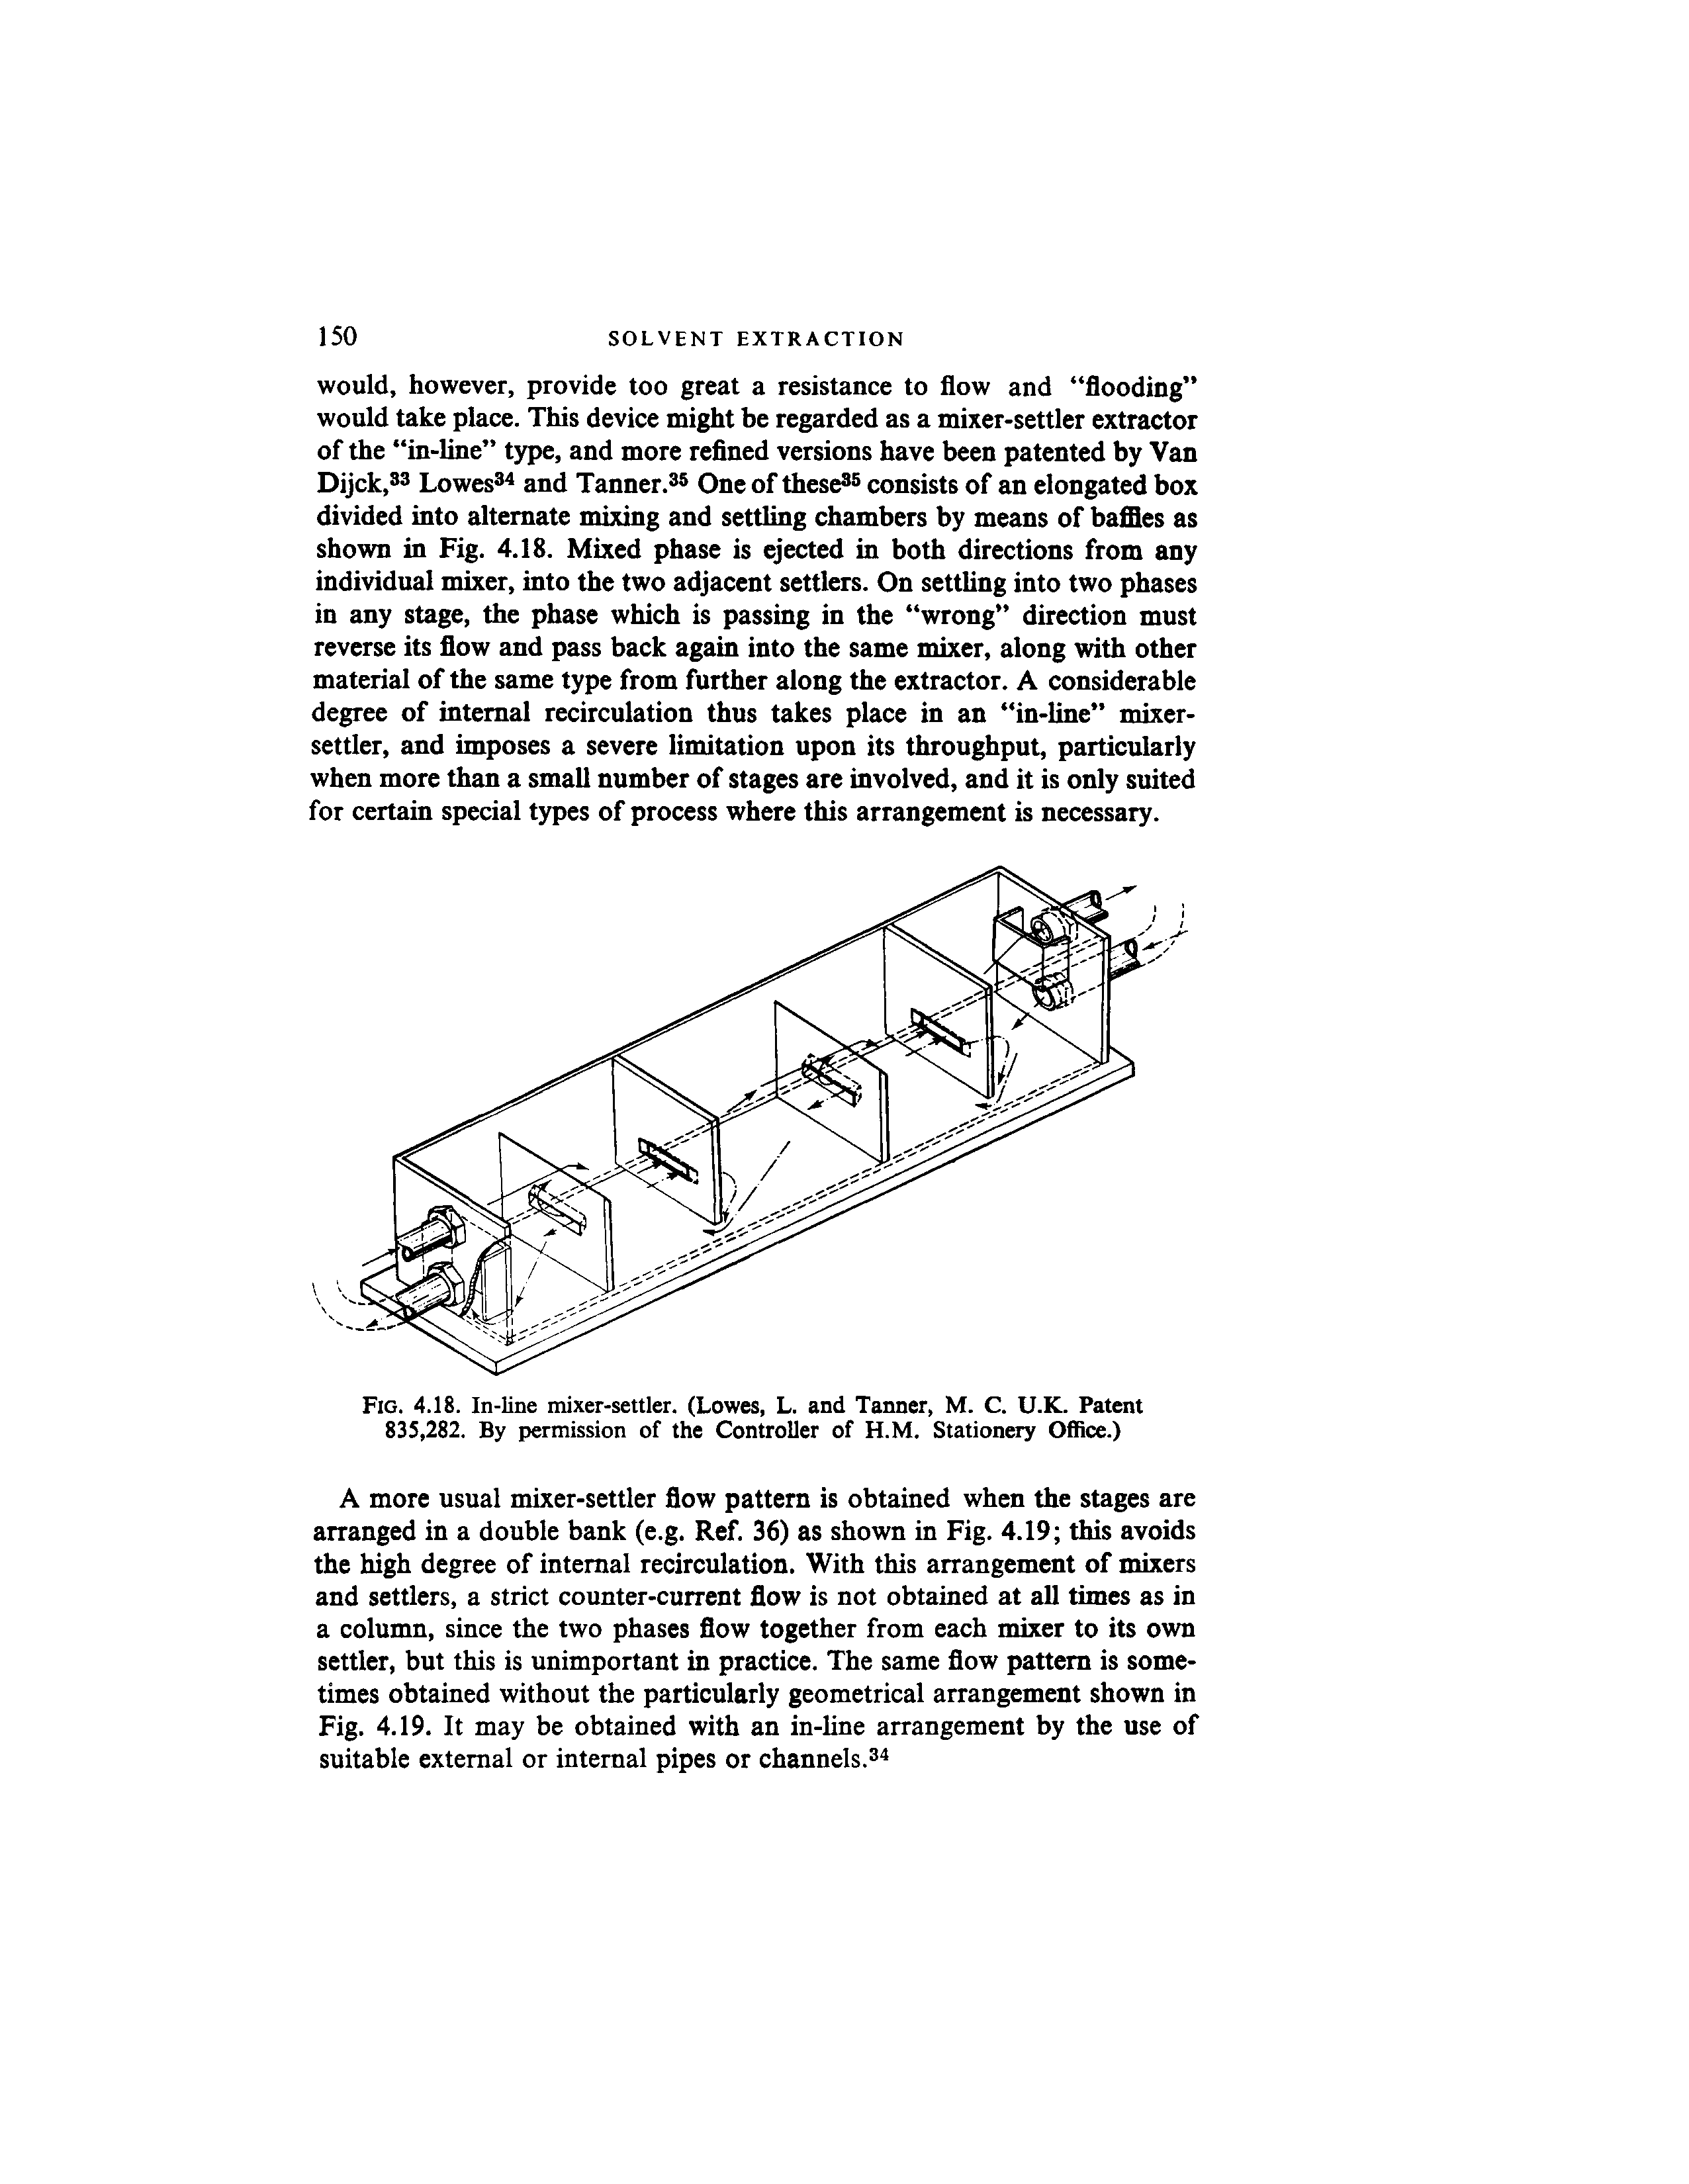 Fig. 4.18. In-line mixer-settler. (Lowes, L. and Tanner, M. C. U.K. Patent 835,282. By permission of the Controller of H.M. Stationery Office.)...